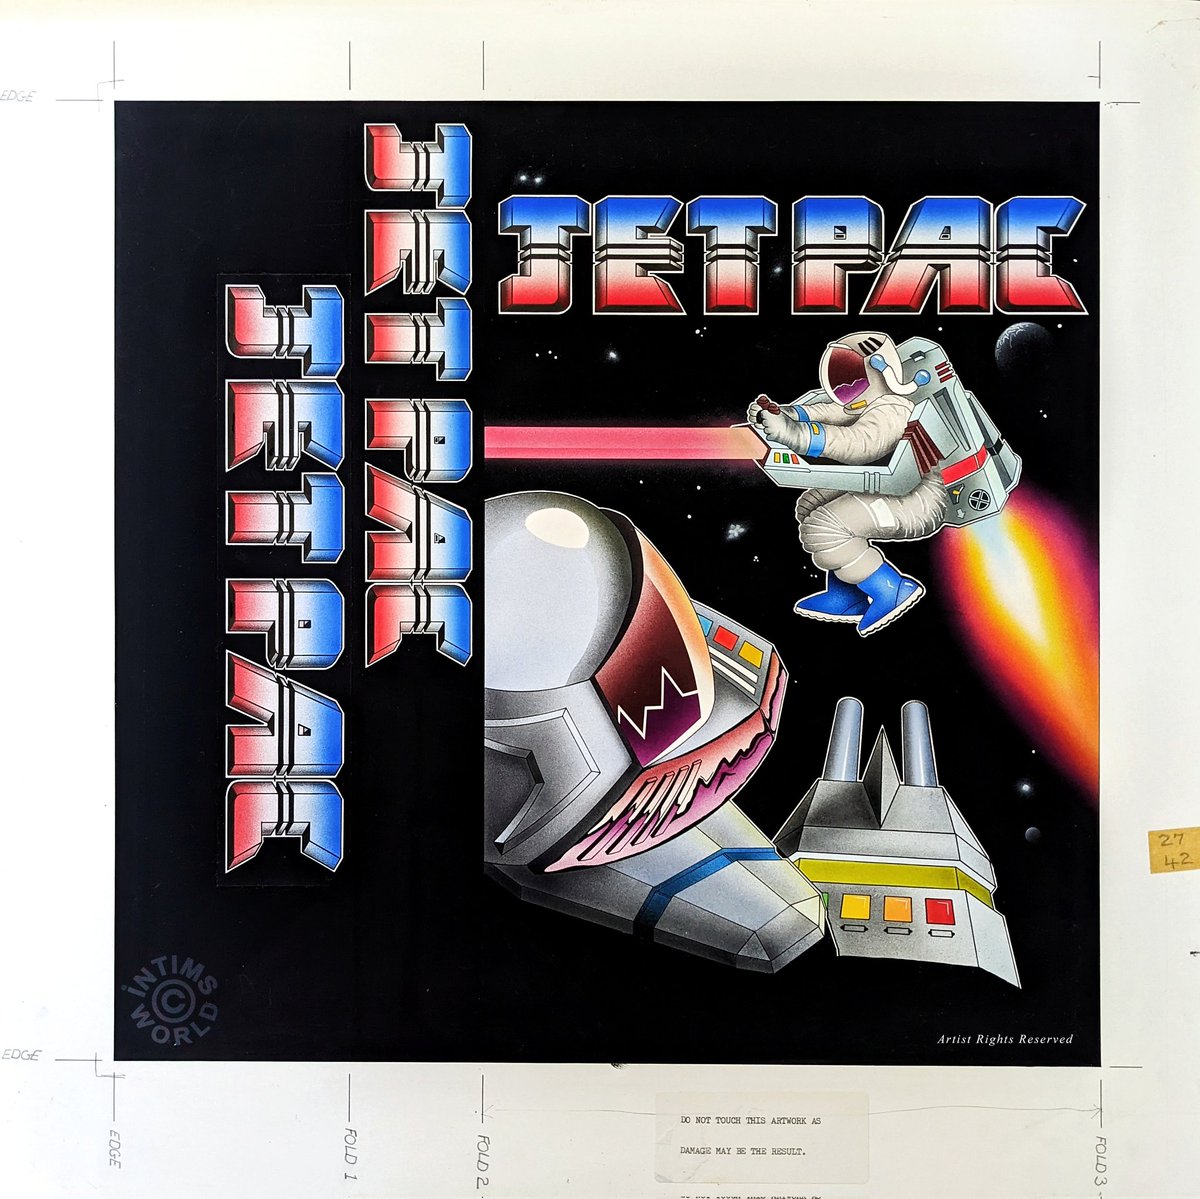 Original airbrushed artwork for Jetpac. 40 years on and I thought by now I’d have my own jet pack! 🚀 #intimsworld #jetpac #originalartwork #anniversary